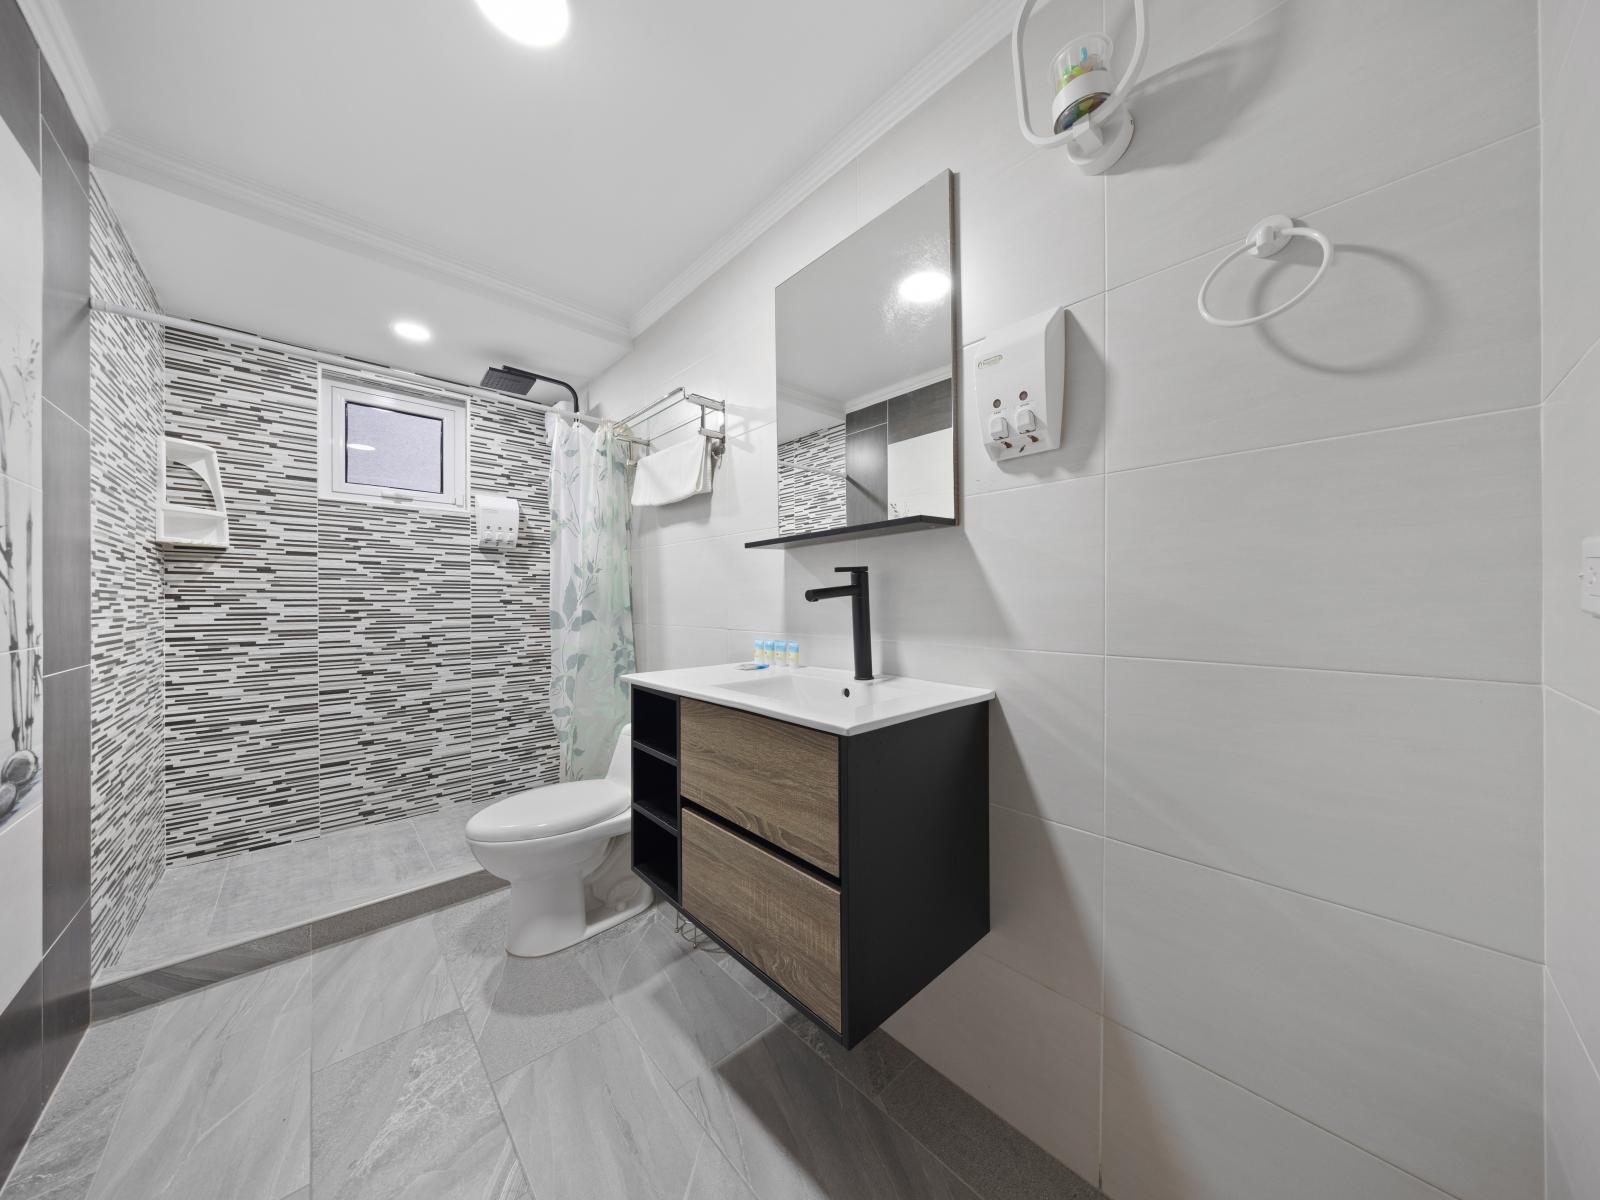 Cherish moments of solitude in the bathroom of the home in Aruba - Spacious walk-in shower area, where peace and relaxation abound after a long day of adventure - Relax in an inviting setting featuring soothing colors for tranquility